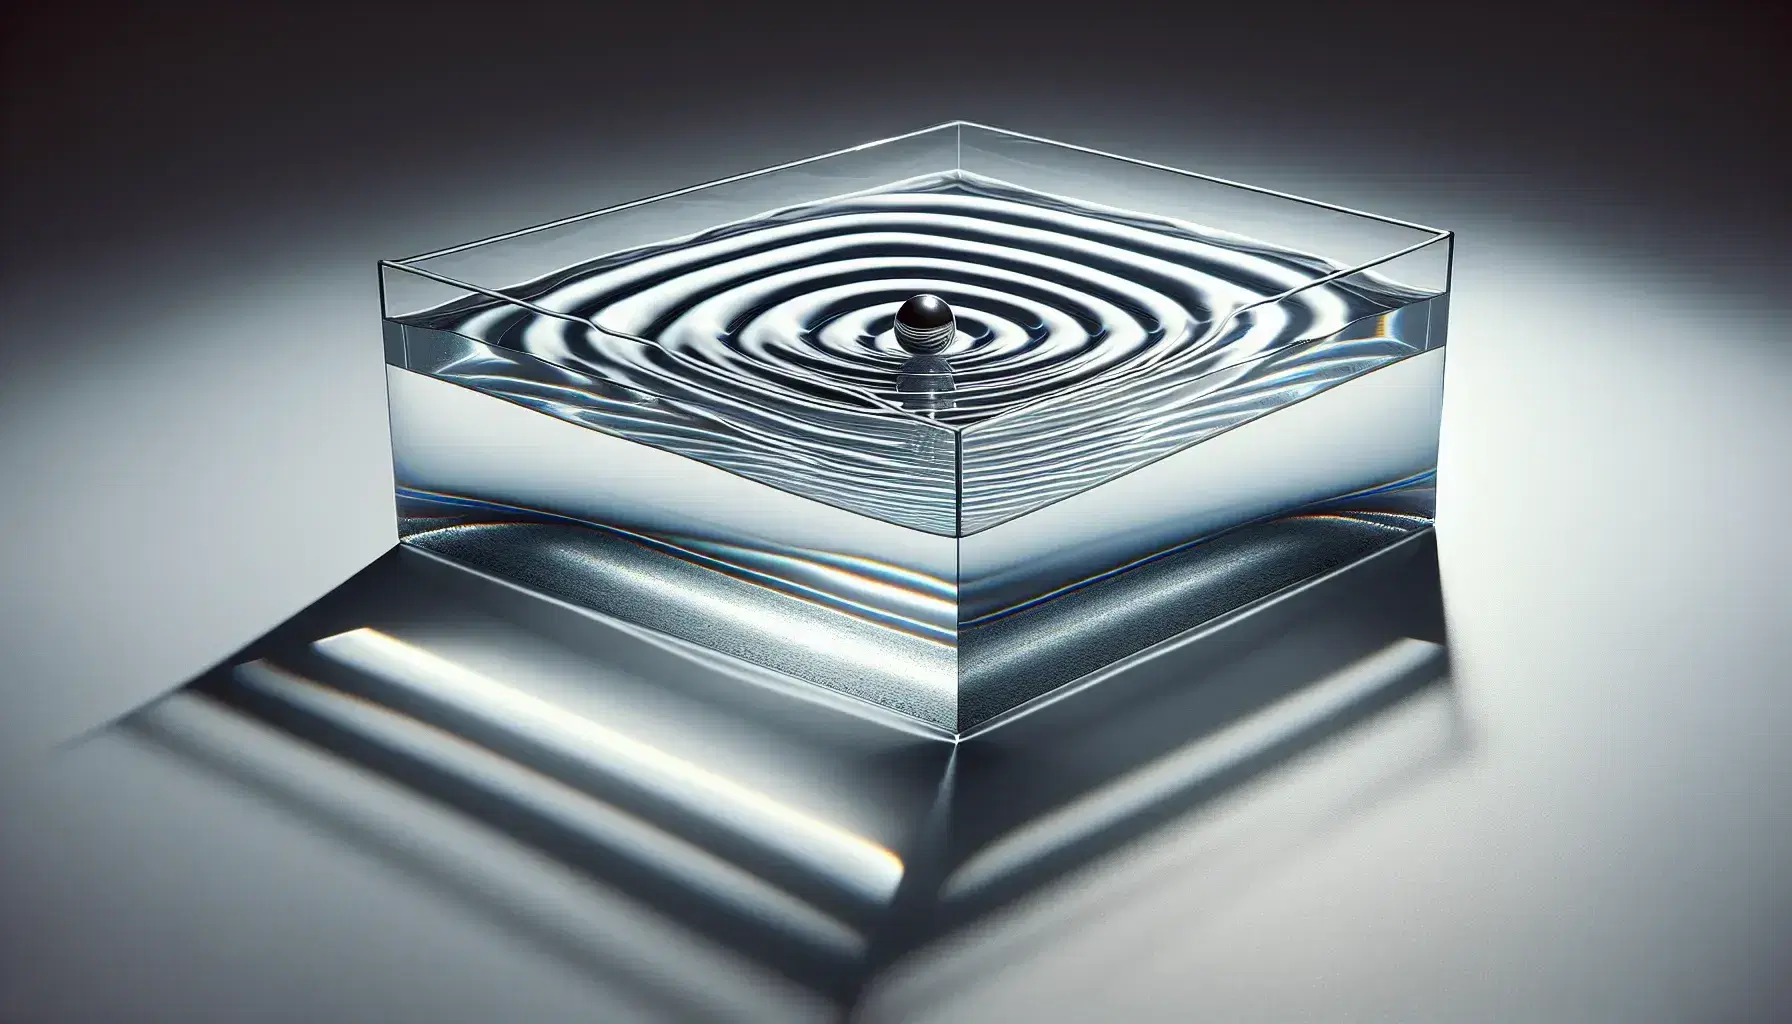 Ripple tank experiment showing concentric circular water ripples from a dropped metal ball, with wave patterns projected as light and shadow.